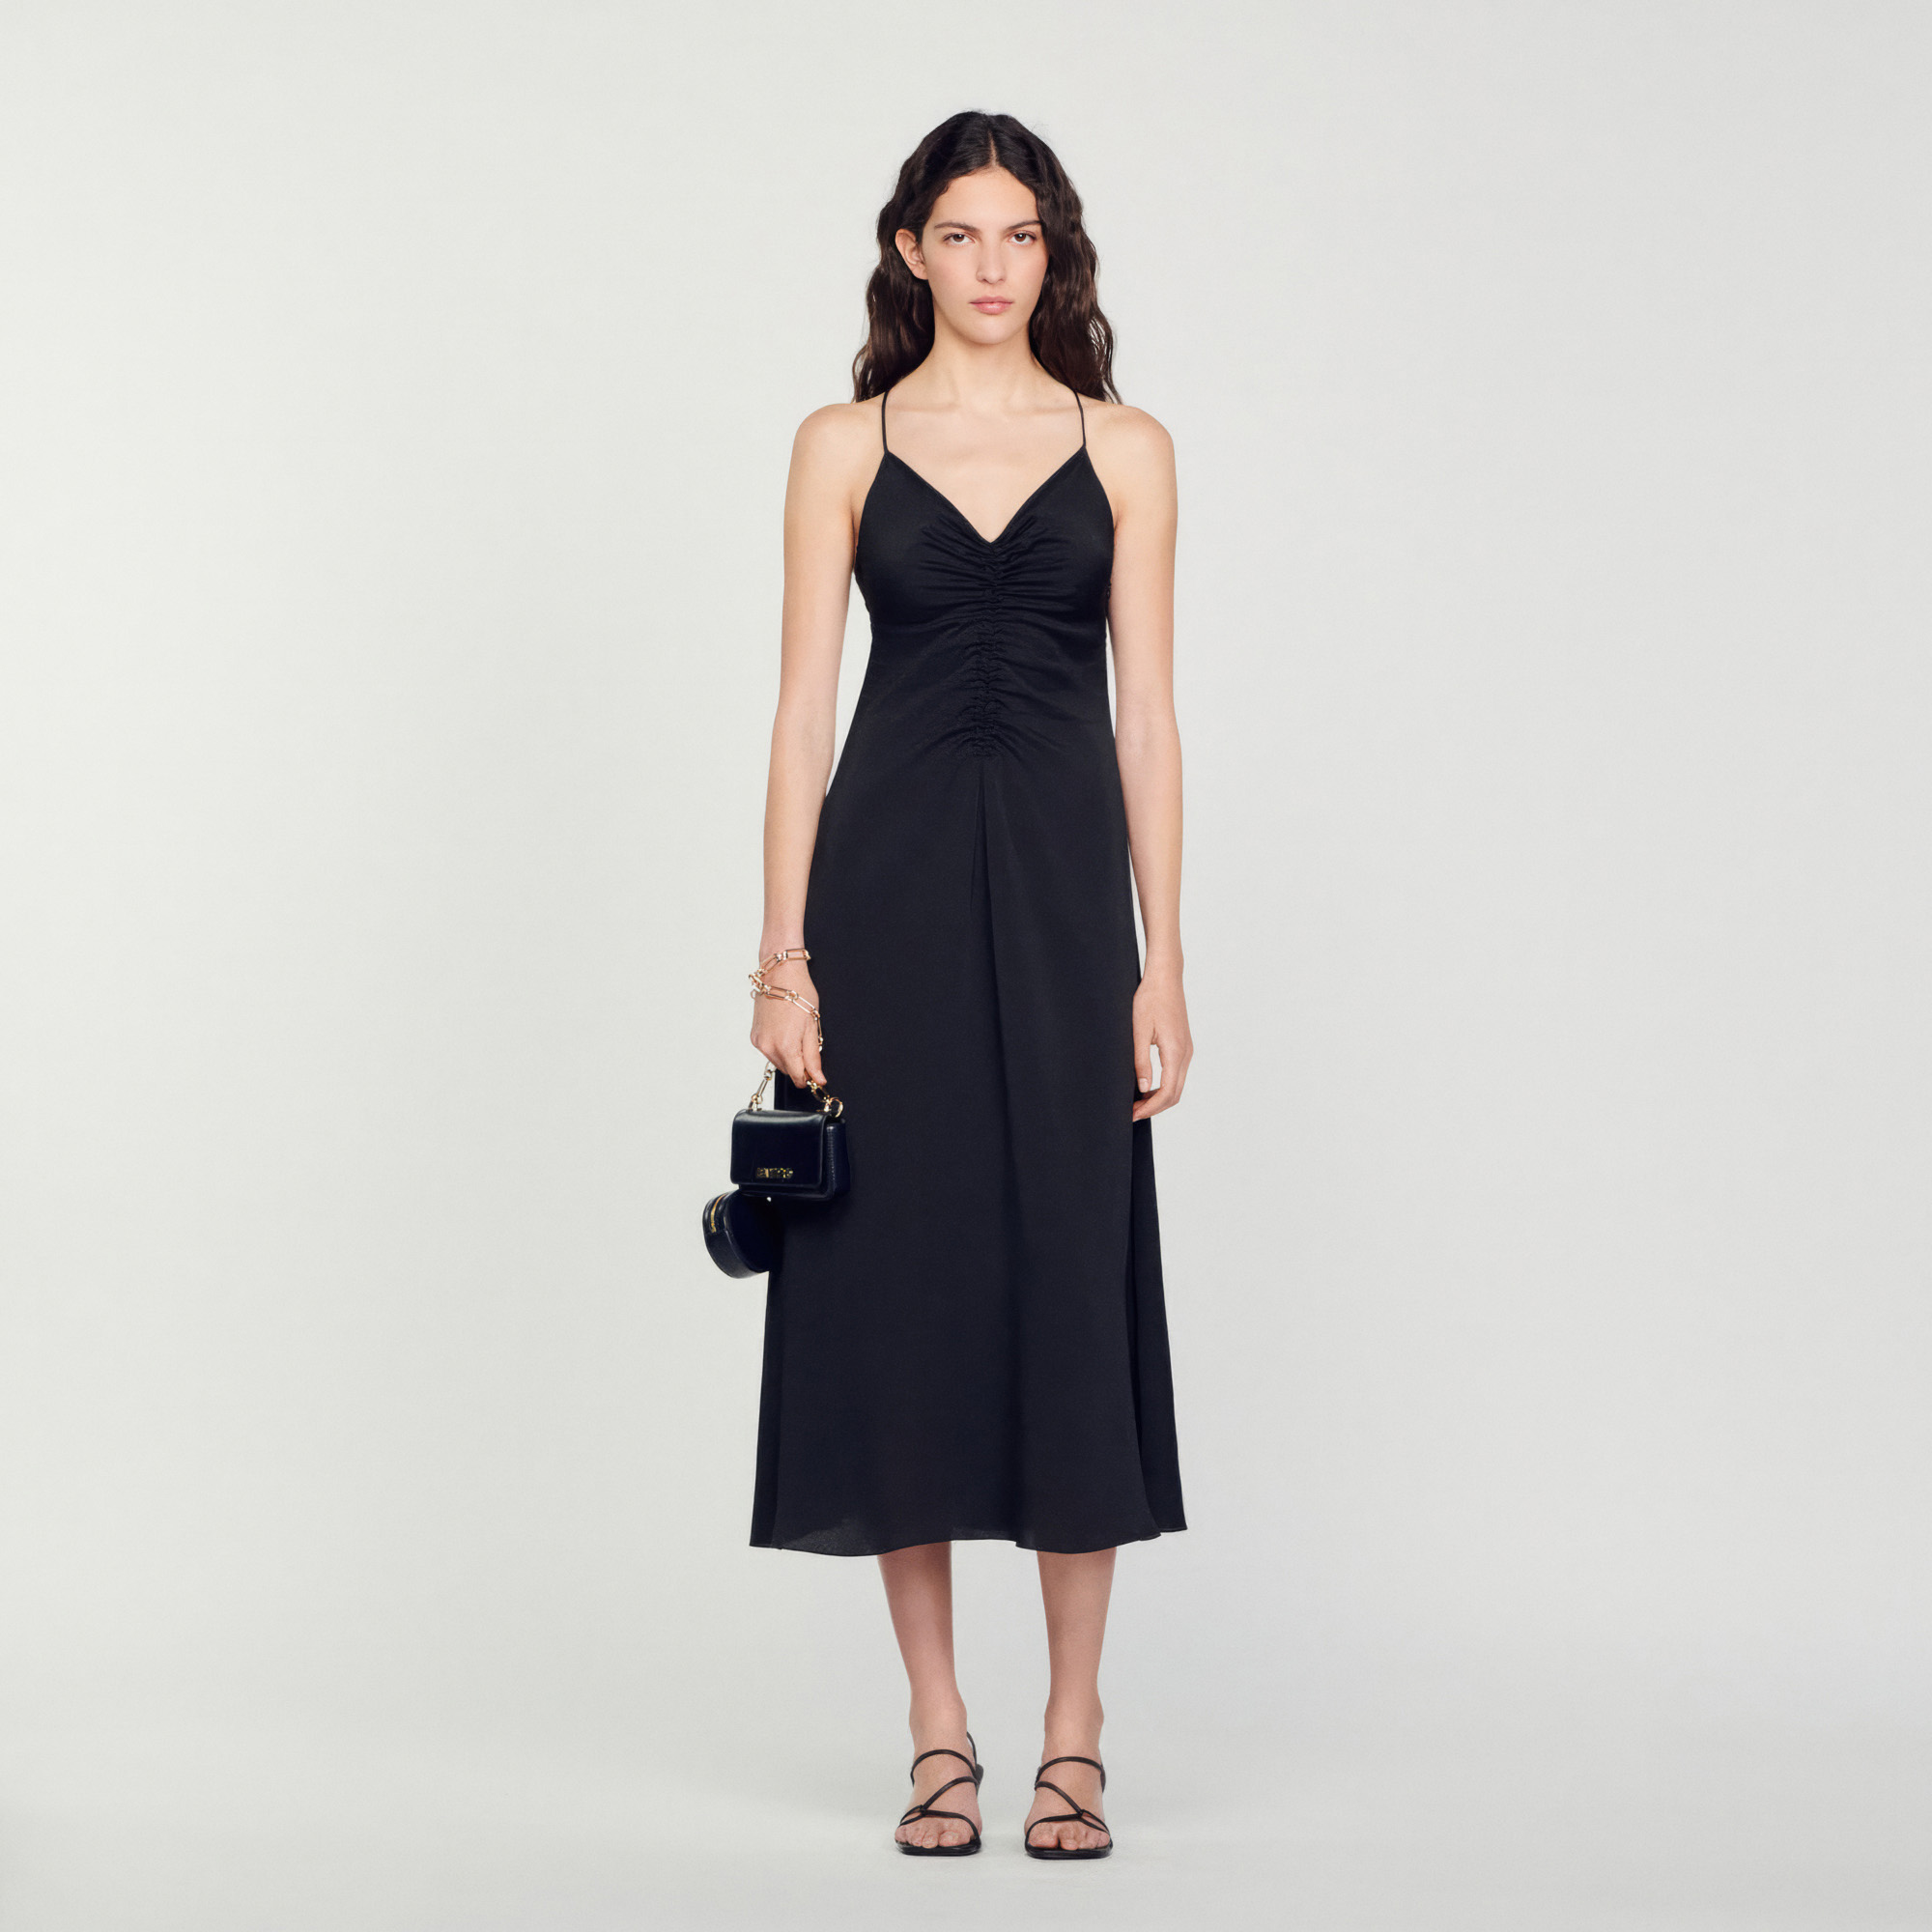 Sandro polyester Sandro women's dress â€¢ Long dress with narrow straps â€¢ V-neck â€¢ Crossover straps tied at the back â€¢ Gathers at the front â€¢ Figure-hugging bodice â€¢ Flared skirt â€¢ Midi length â€¢ Concealed zip fastening at the side The model is 5'10 tall and wears a size 36 FR / 4 US